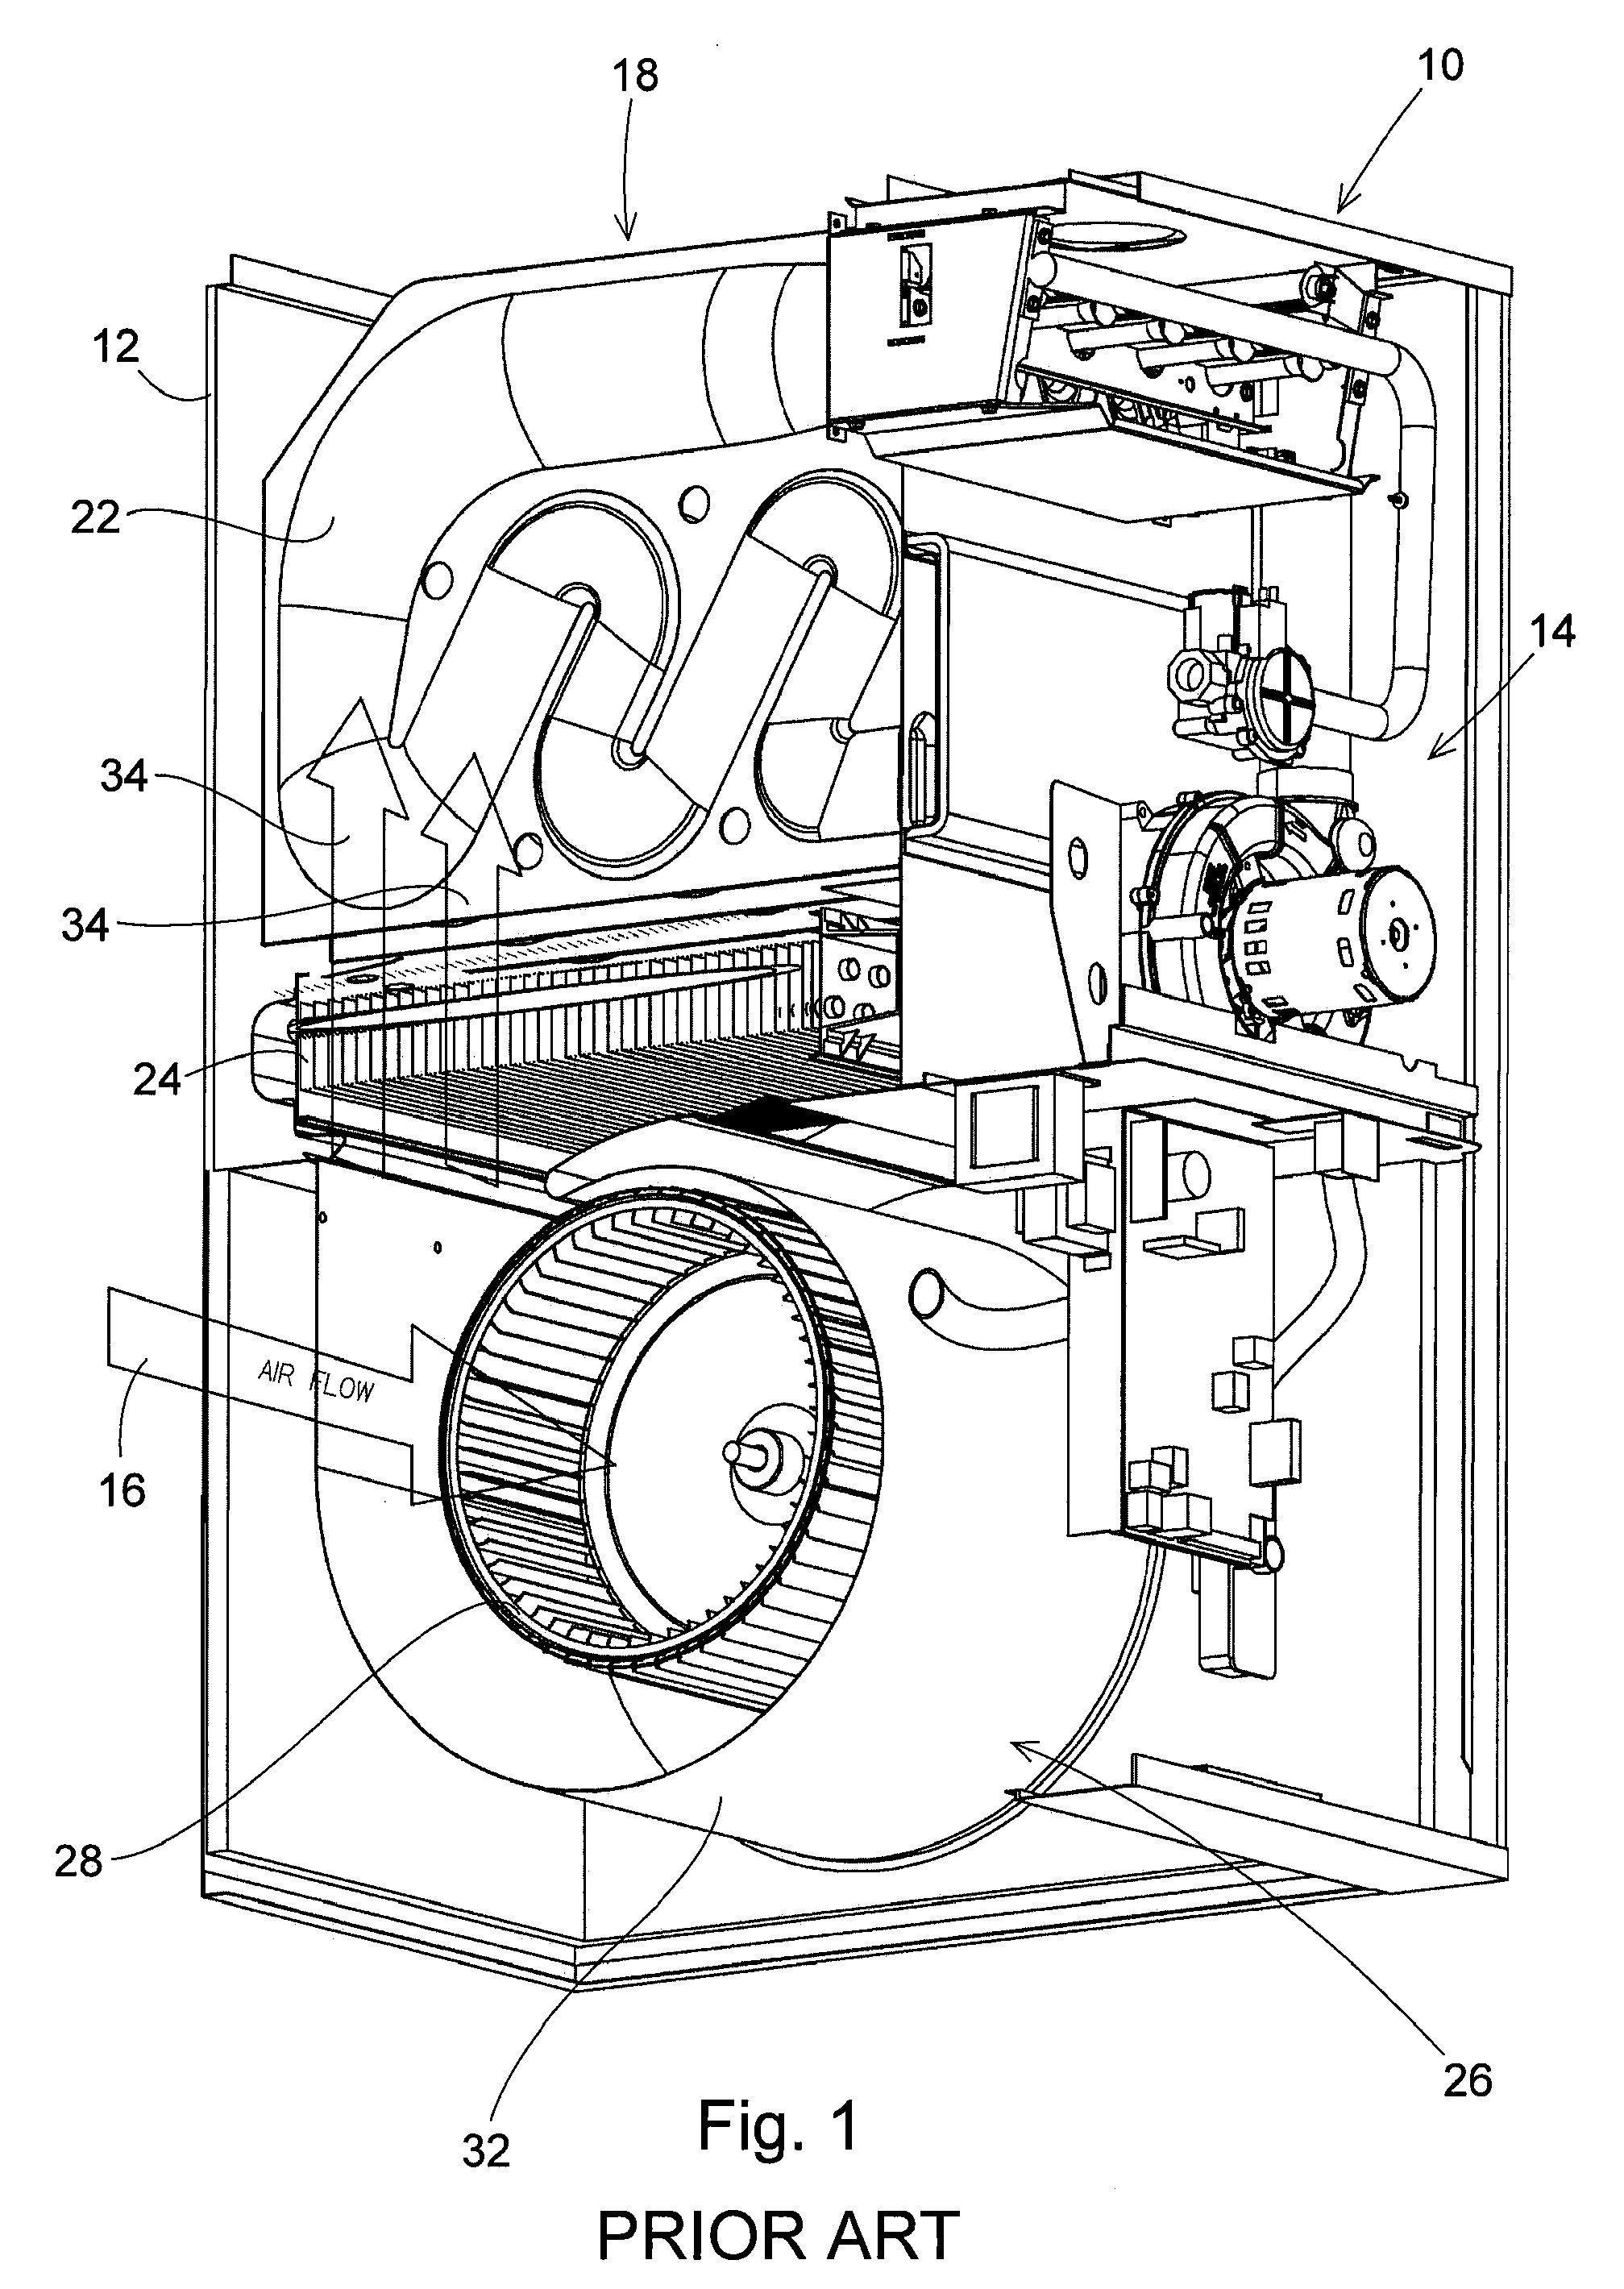 High Efficiency Furnace Having a Blower Housing with an Enlarged Air Outlet Opening